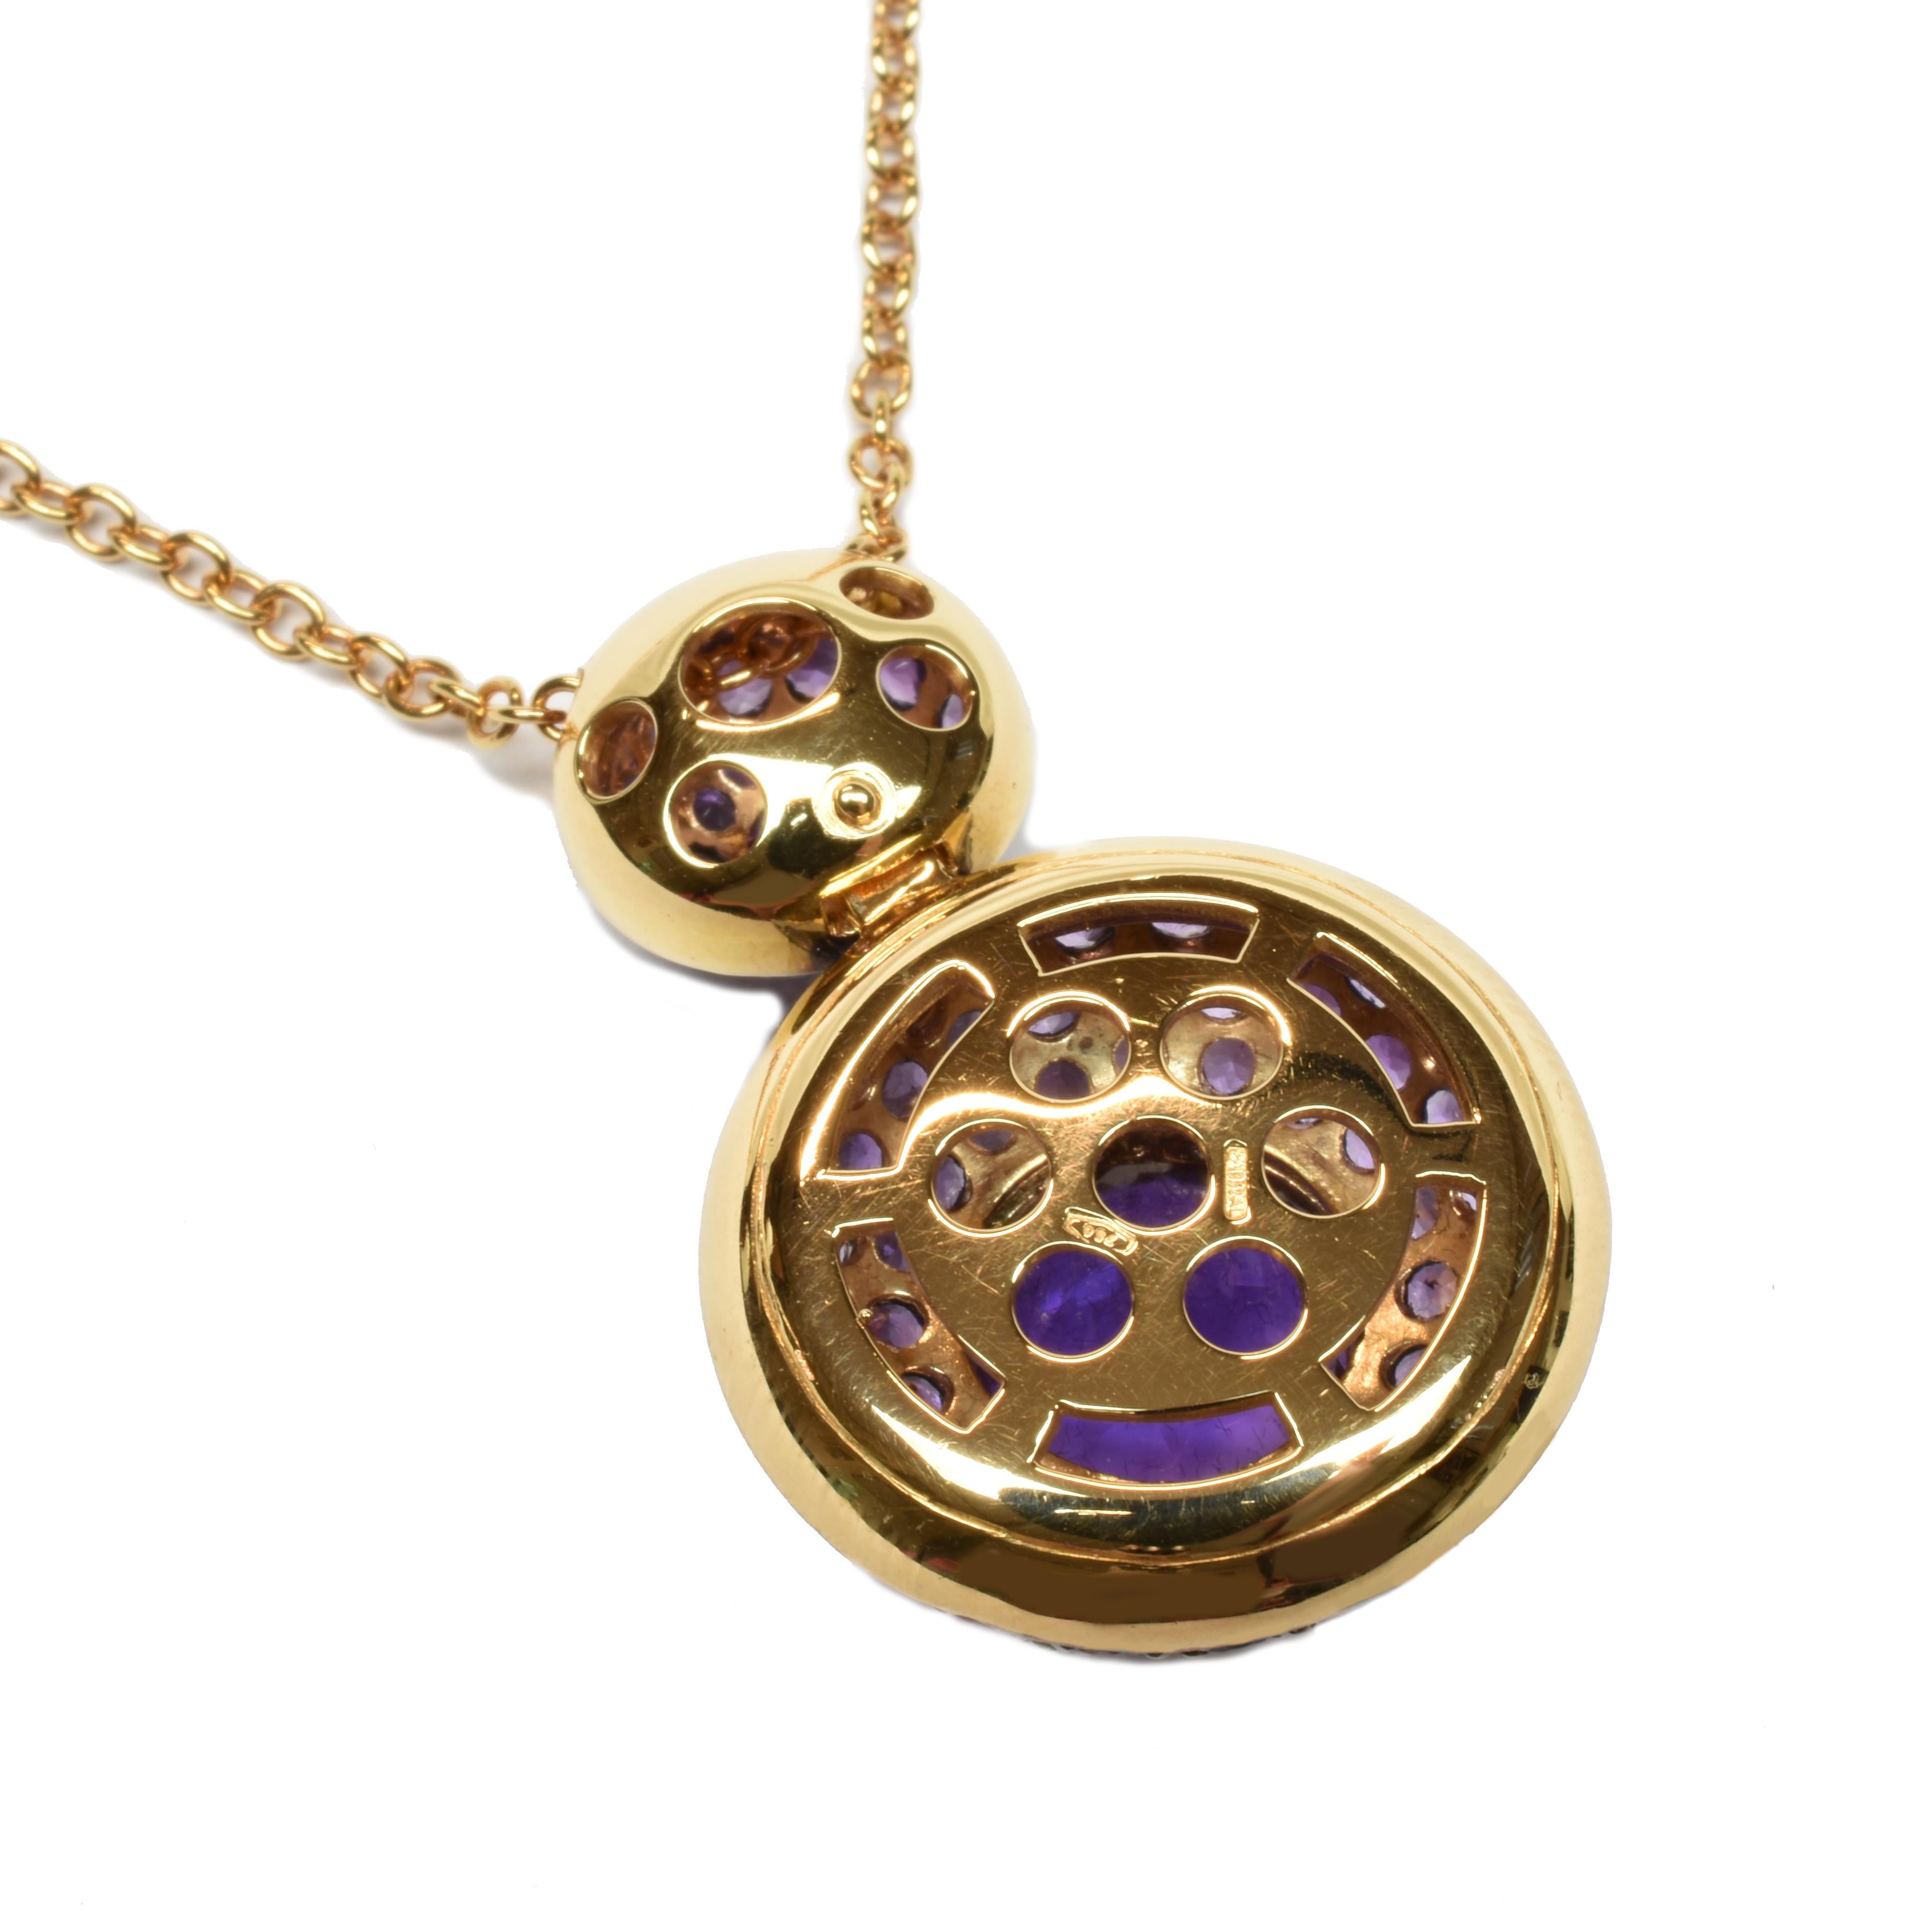 Gilberto Cassola 18Kt Rose Gold Round Pendant with Round Amethysts and White Diamonds.
Handmade in our Atelier in Valenza Italy.
The Central Amethyst has a 10 mm Diameter and a single small row of White Diamonds on Rose Gold around it.
Black Rhodium